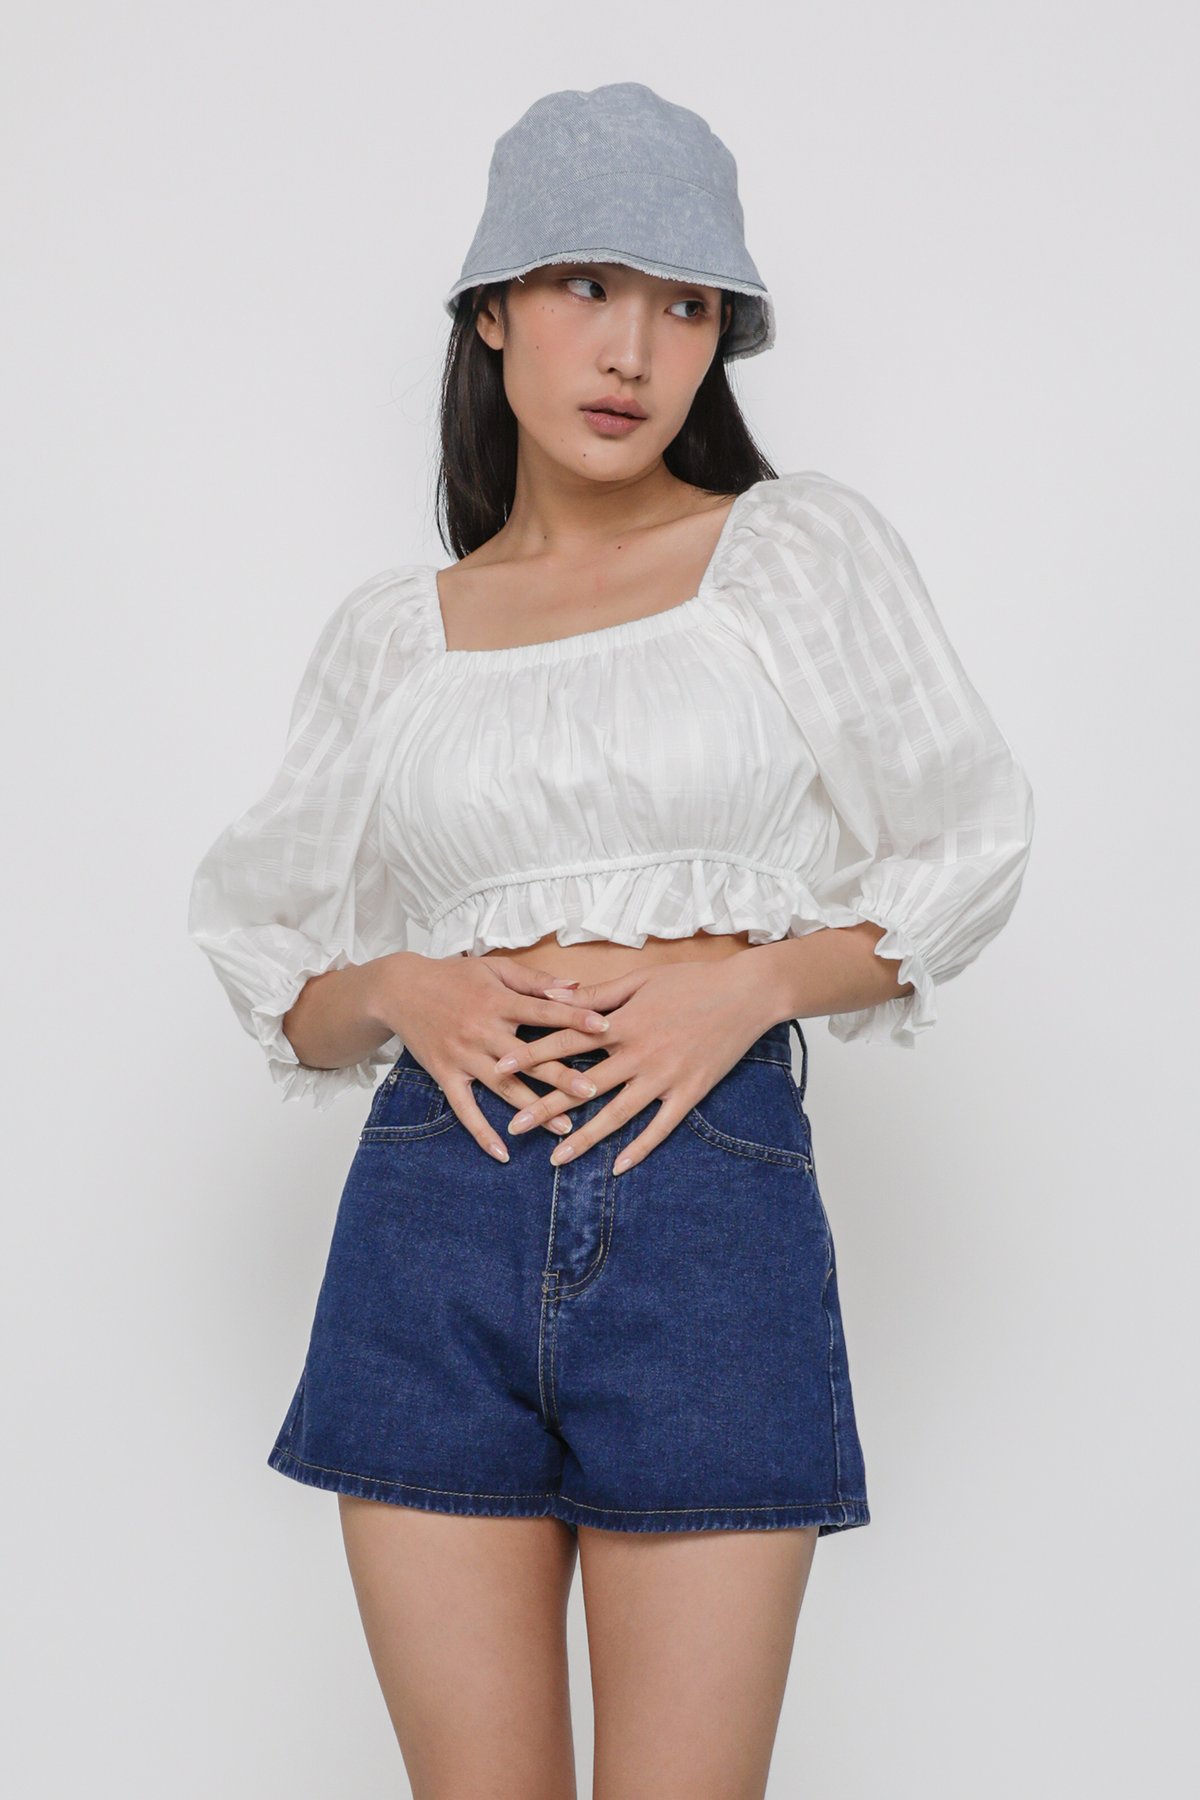 Lucio Sleeved Crop Top (White Gingham)